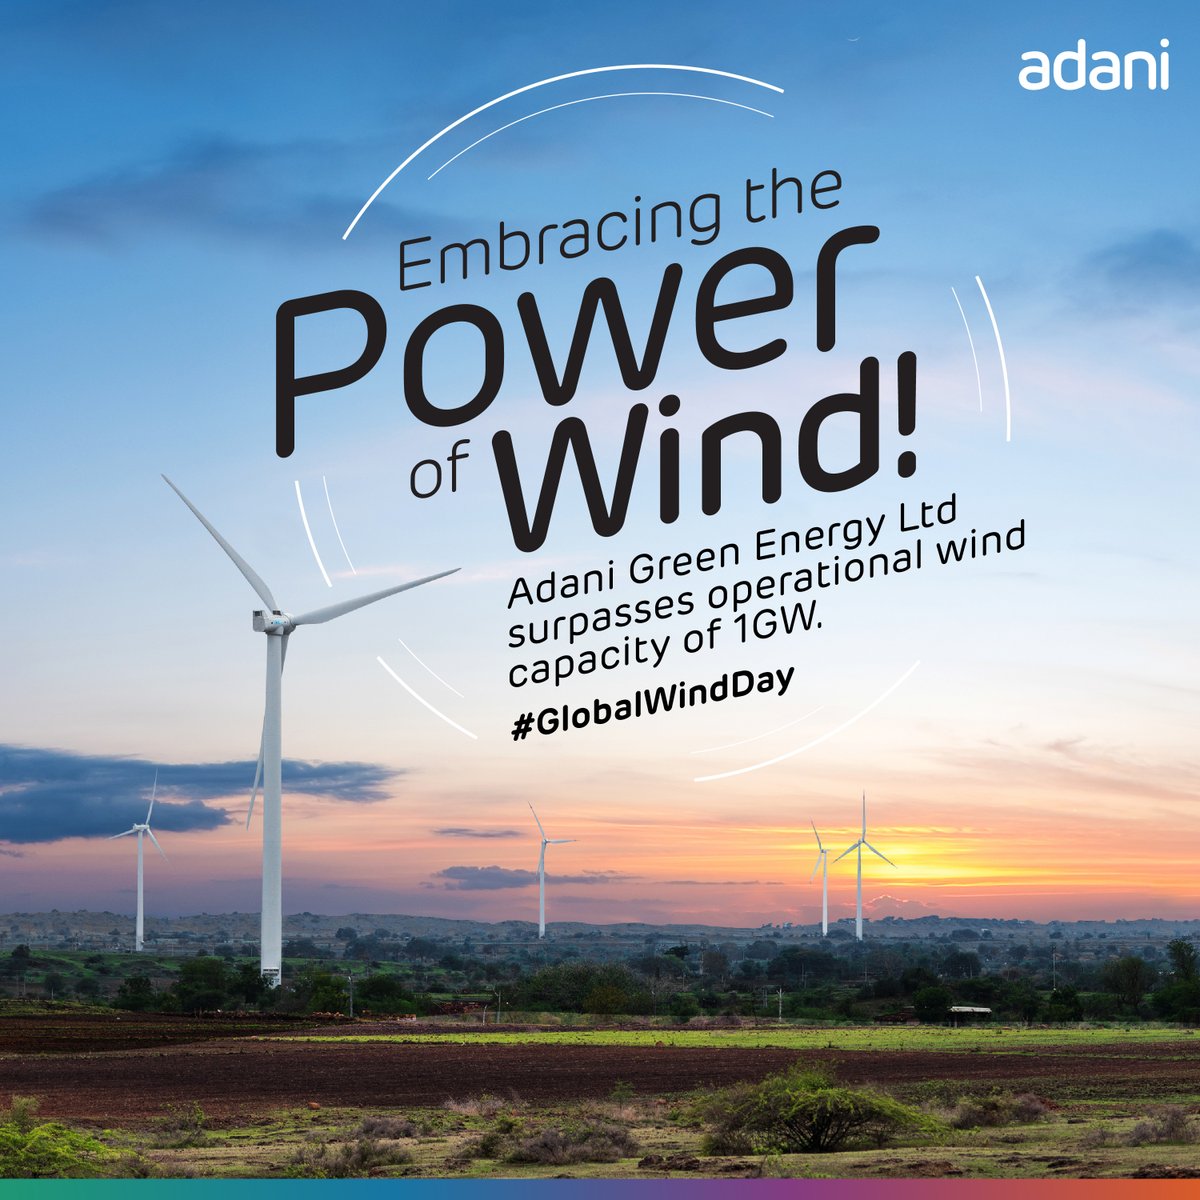 Celebrate #GlobalWindDay with us as @AdaniGreen (AGEL) achieves a major milestone! Our operational wind generation capacity has crossed 1GW with the commissioning of a 130 MW wind power plant in Gujarat. Together, let's harness the power of wind for a #sustainable future.